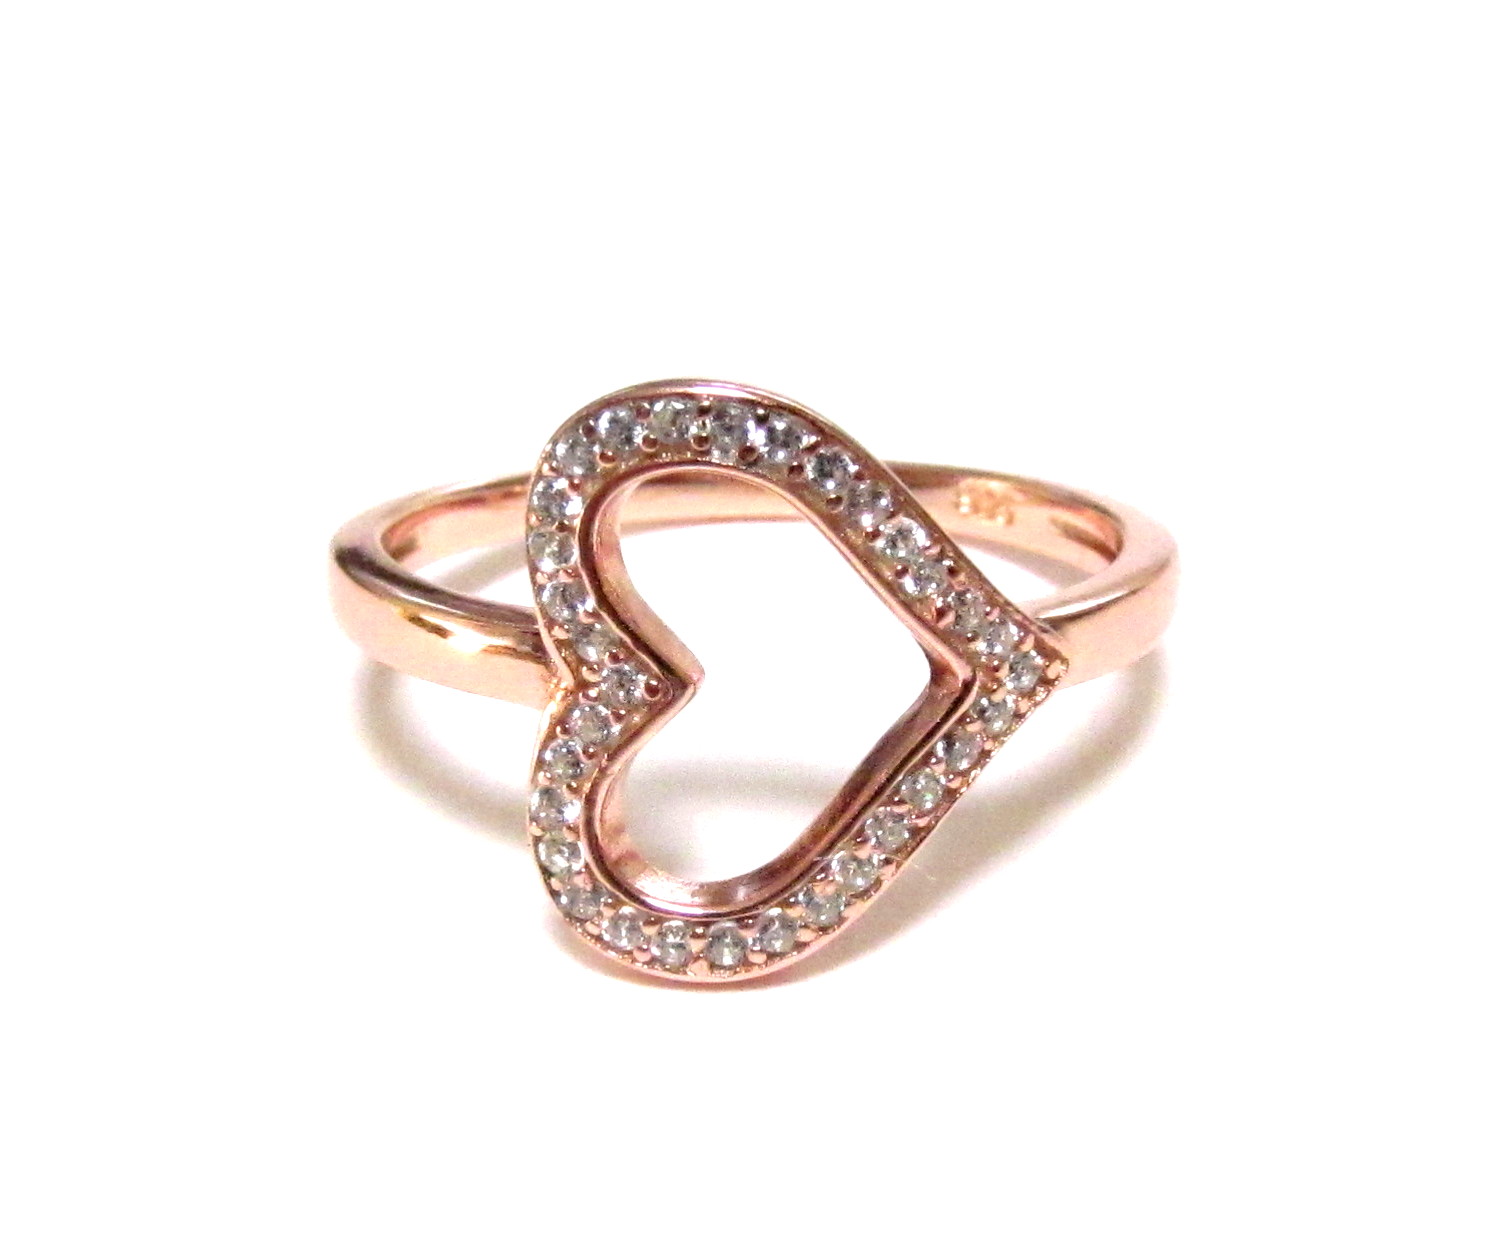 ... Heart RIng-Rose Gold Over 925 Sterling Silver Ring With CZ-Size 6 to 9